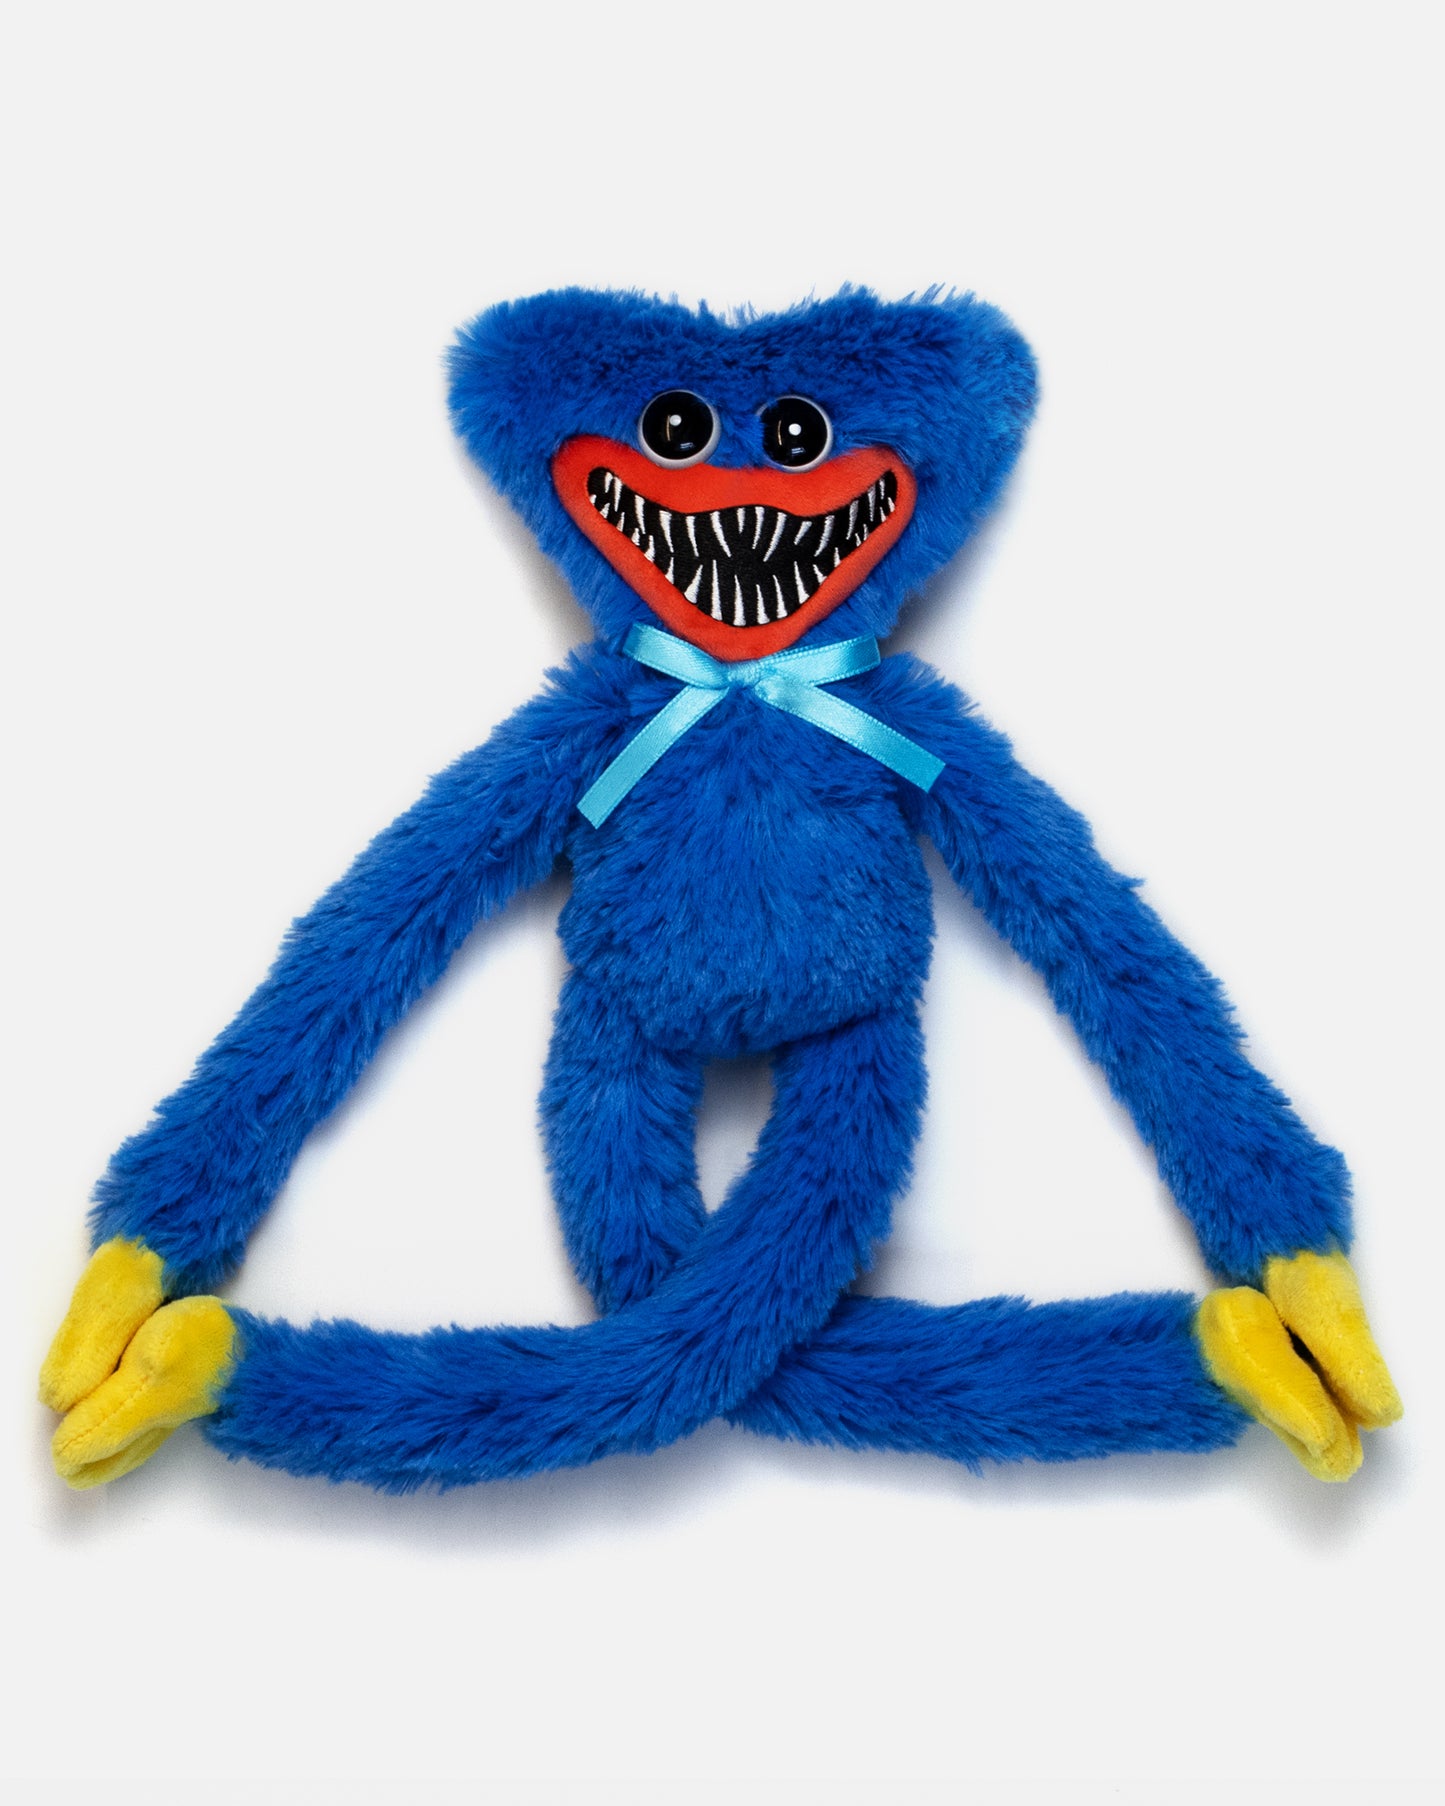 scary huggy wuggy poppy playtime 14" plush front. hands and feet velcro together.